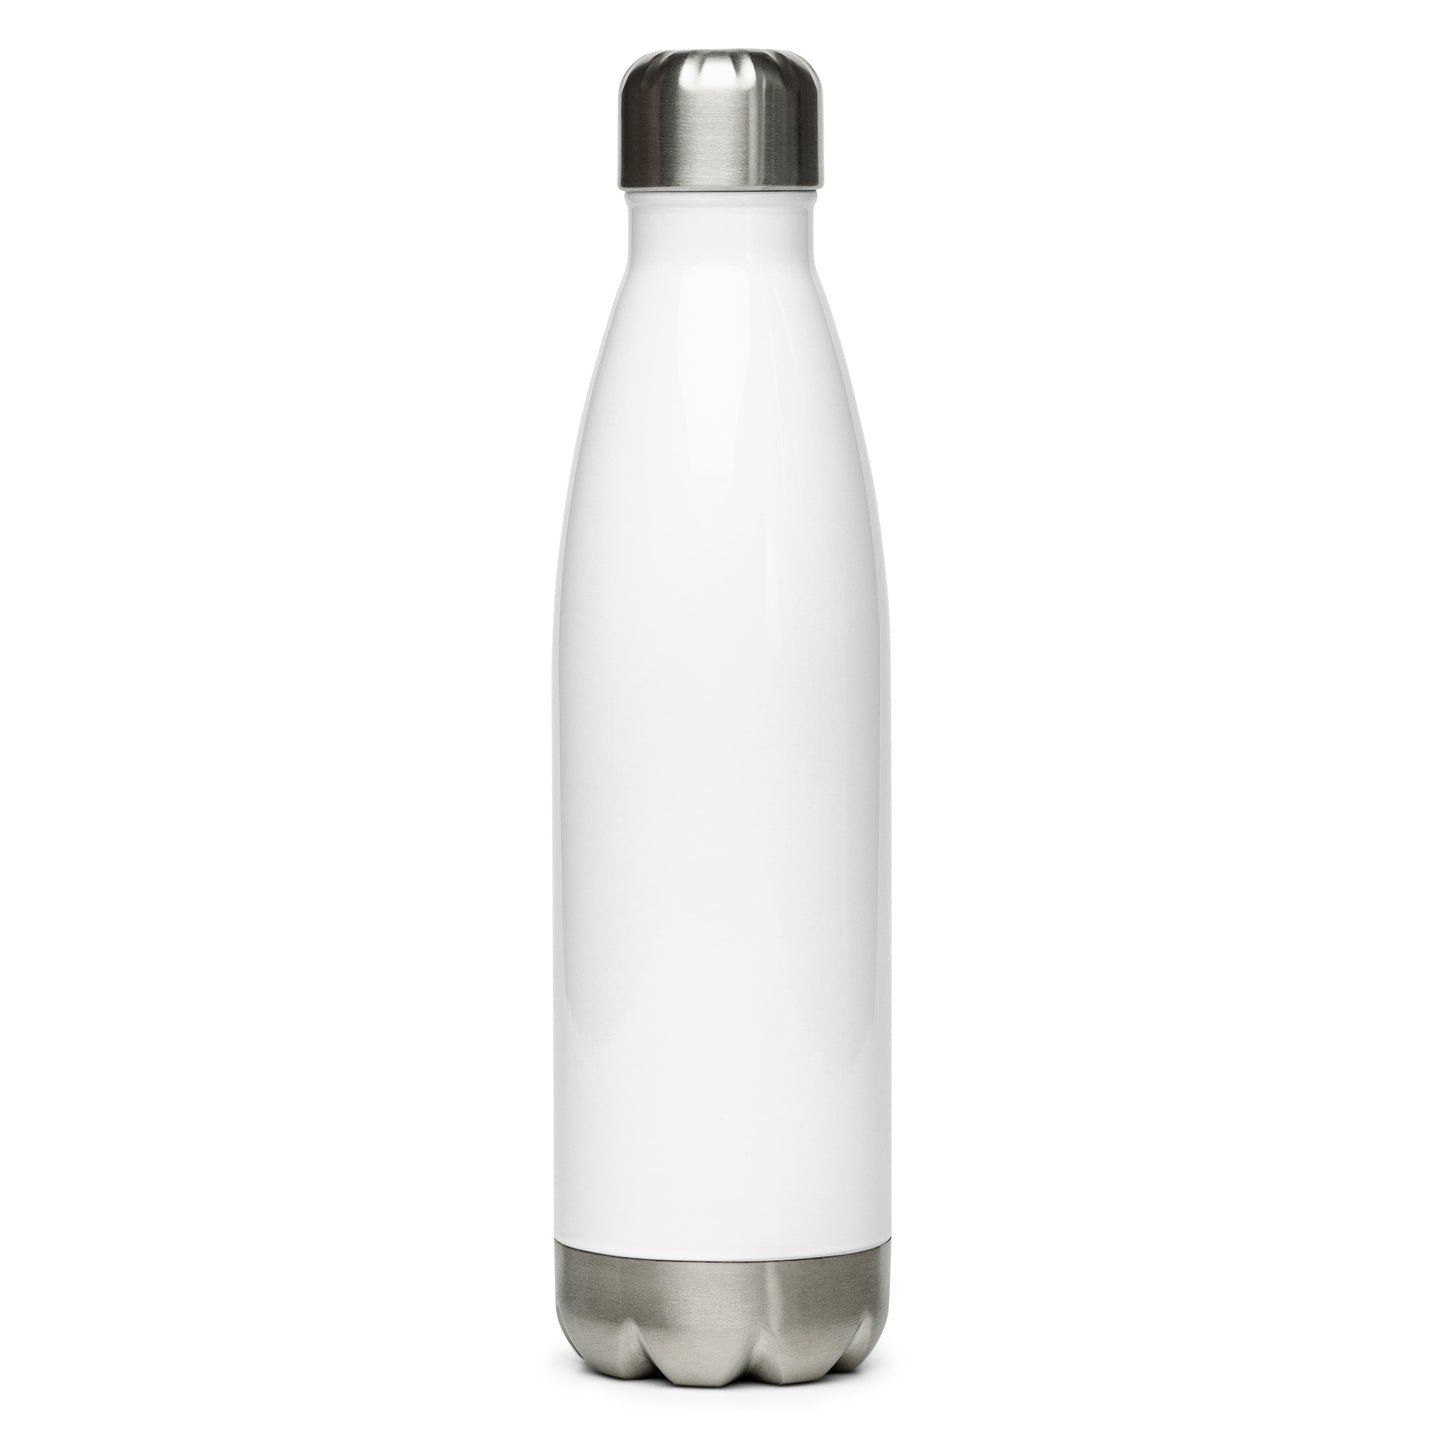 SMFC Stainless Steel Water Bottle